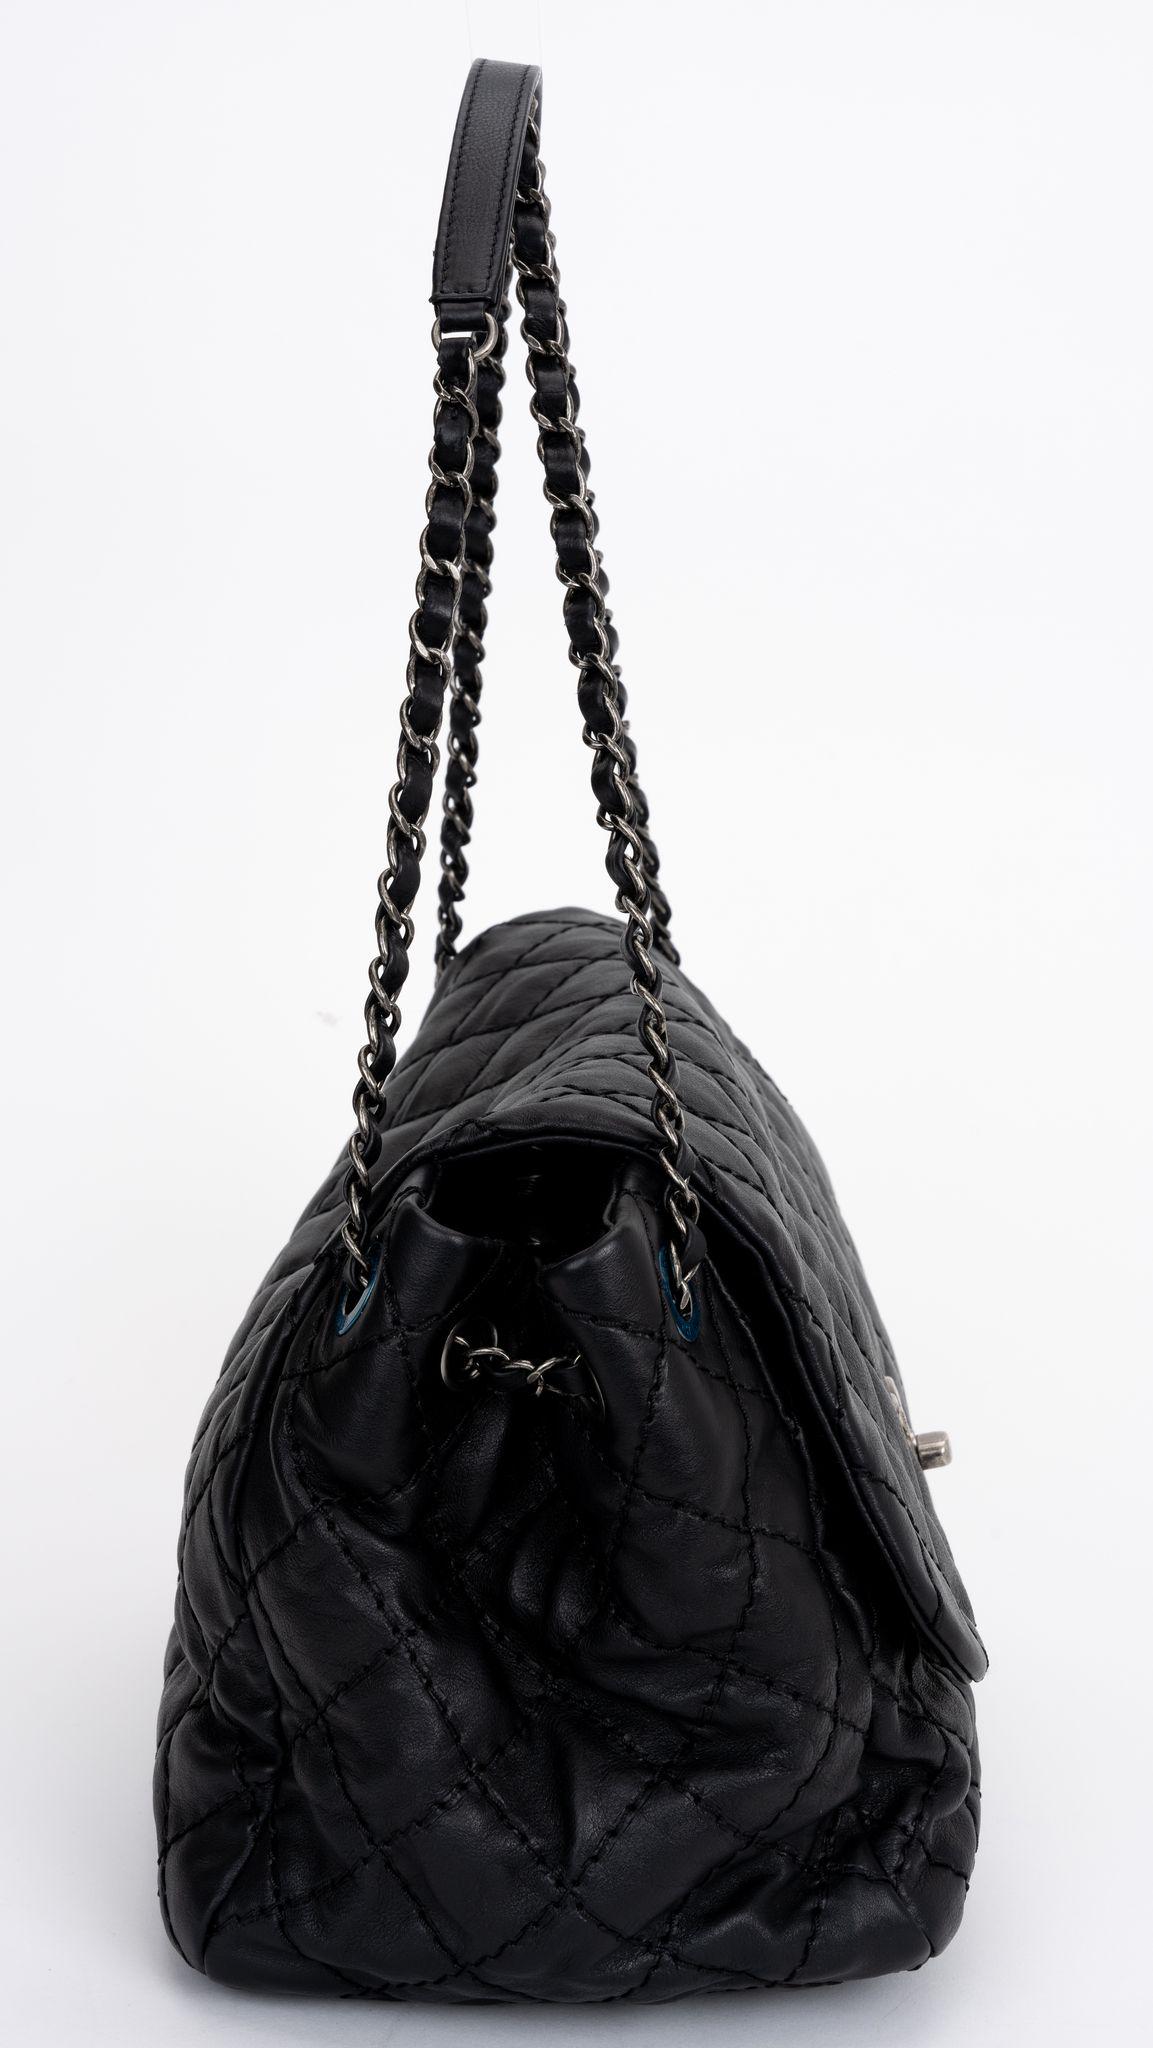 Chanel New Black Calfskin Flap Bag In Excellent Condition For Sale In West Hollywood, CA